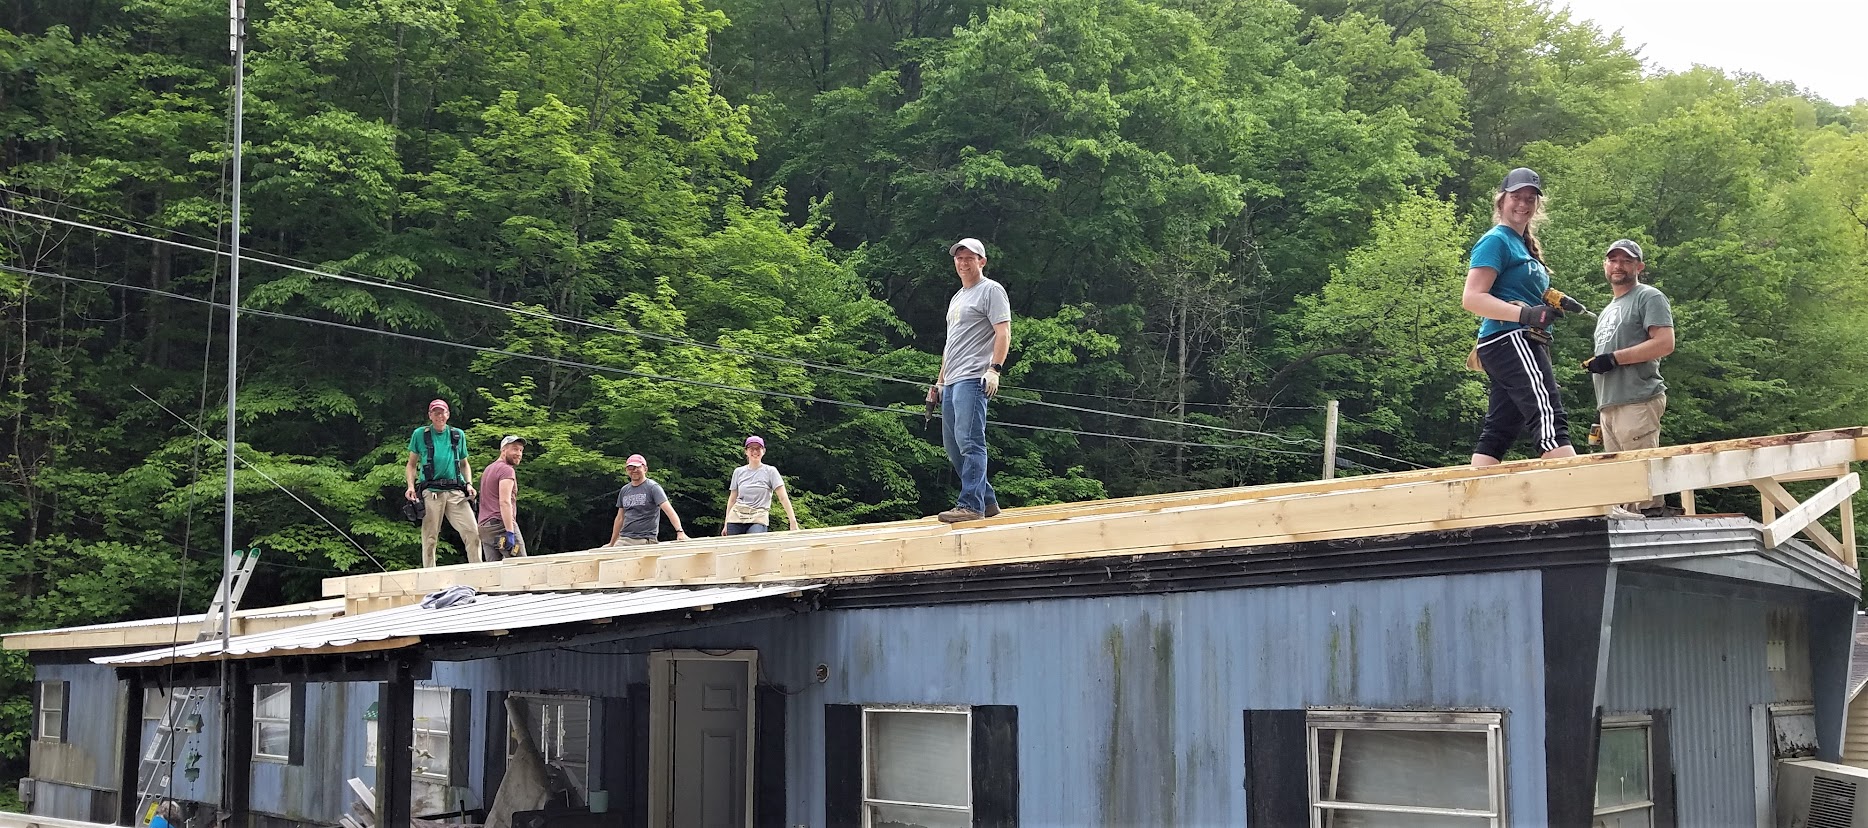 A group of 7 people working on a roof